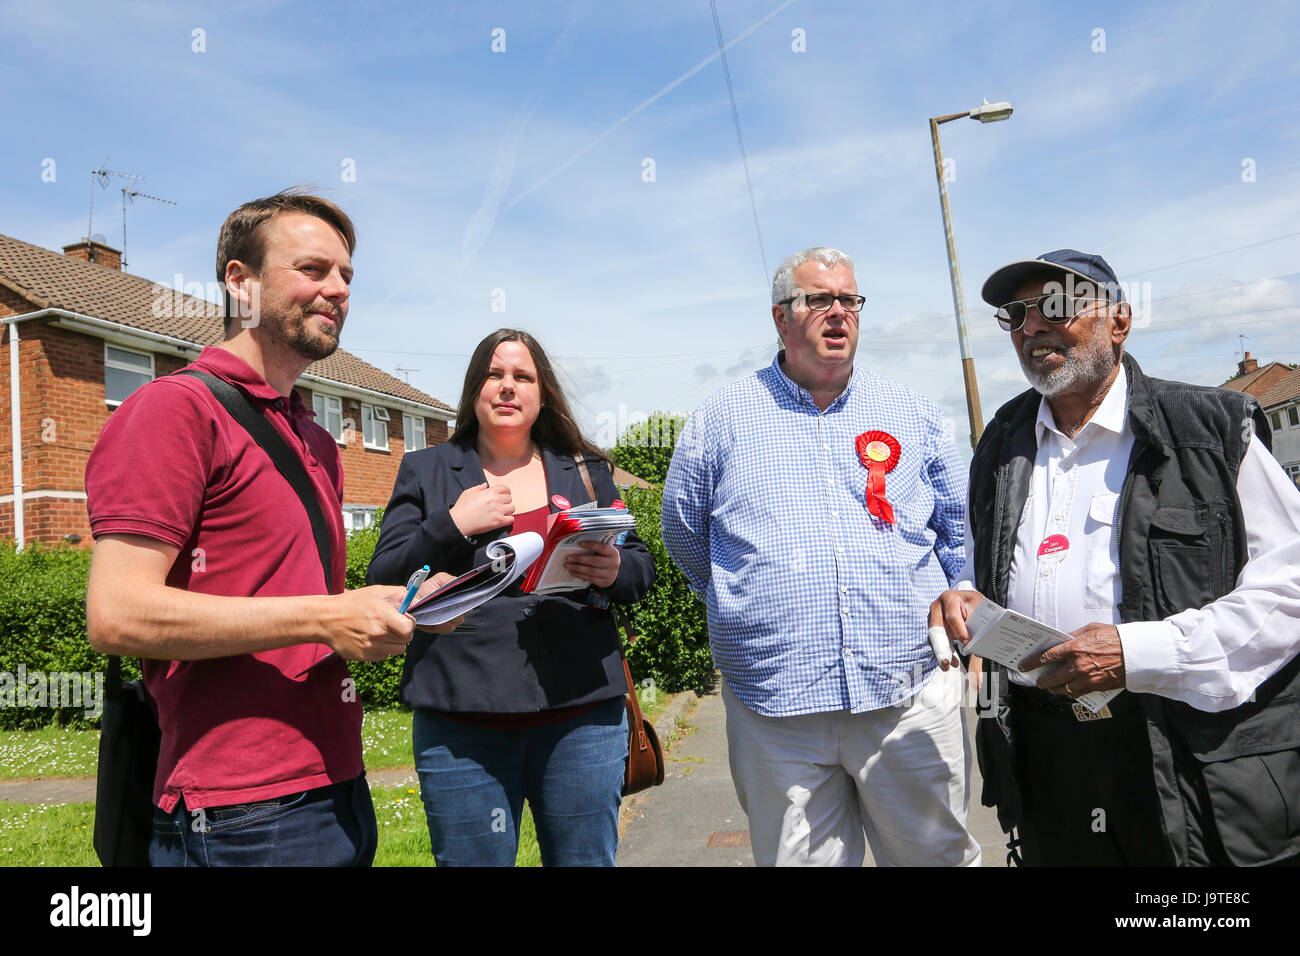 Ian Cooper, Labour Party candidate for Halesowen and Rowley Regis constituency campaigning in the locality. Election 2017 political party MP Stock Photo